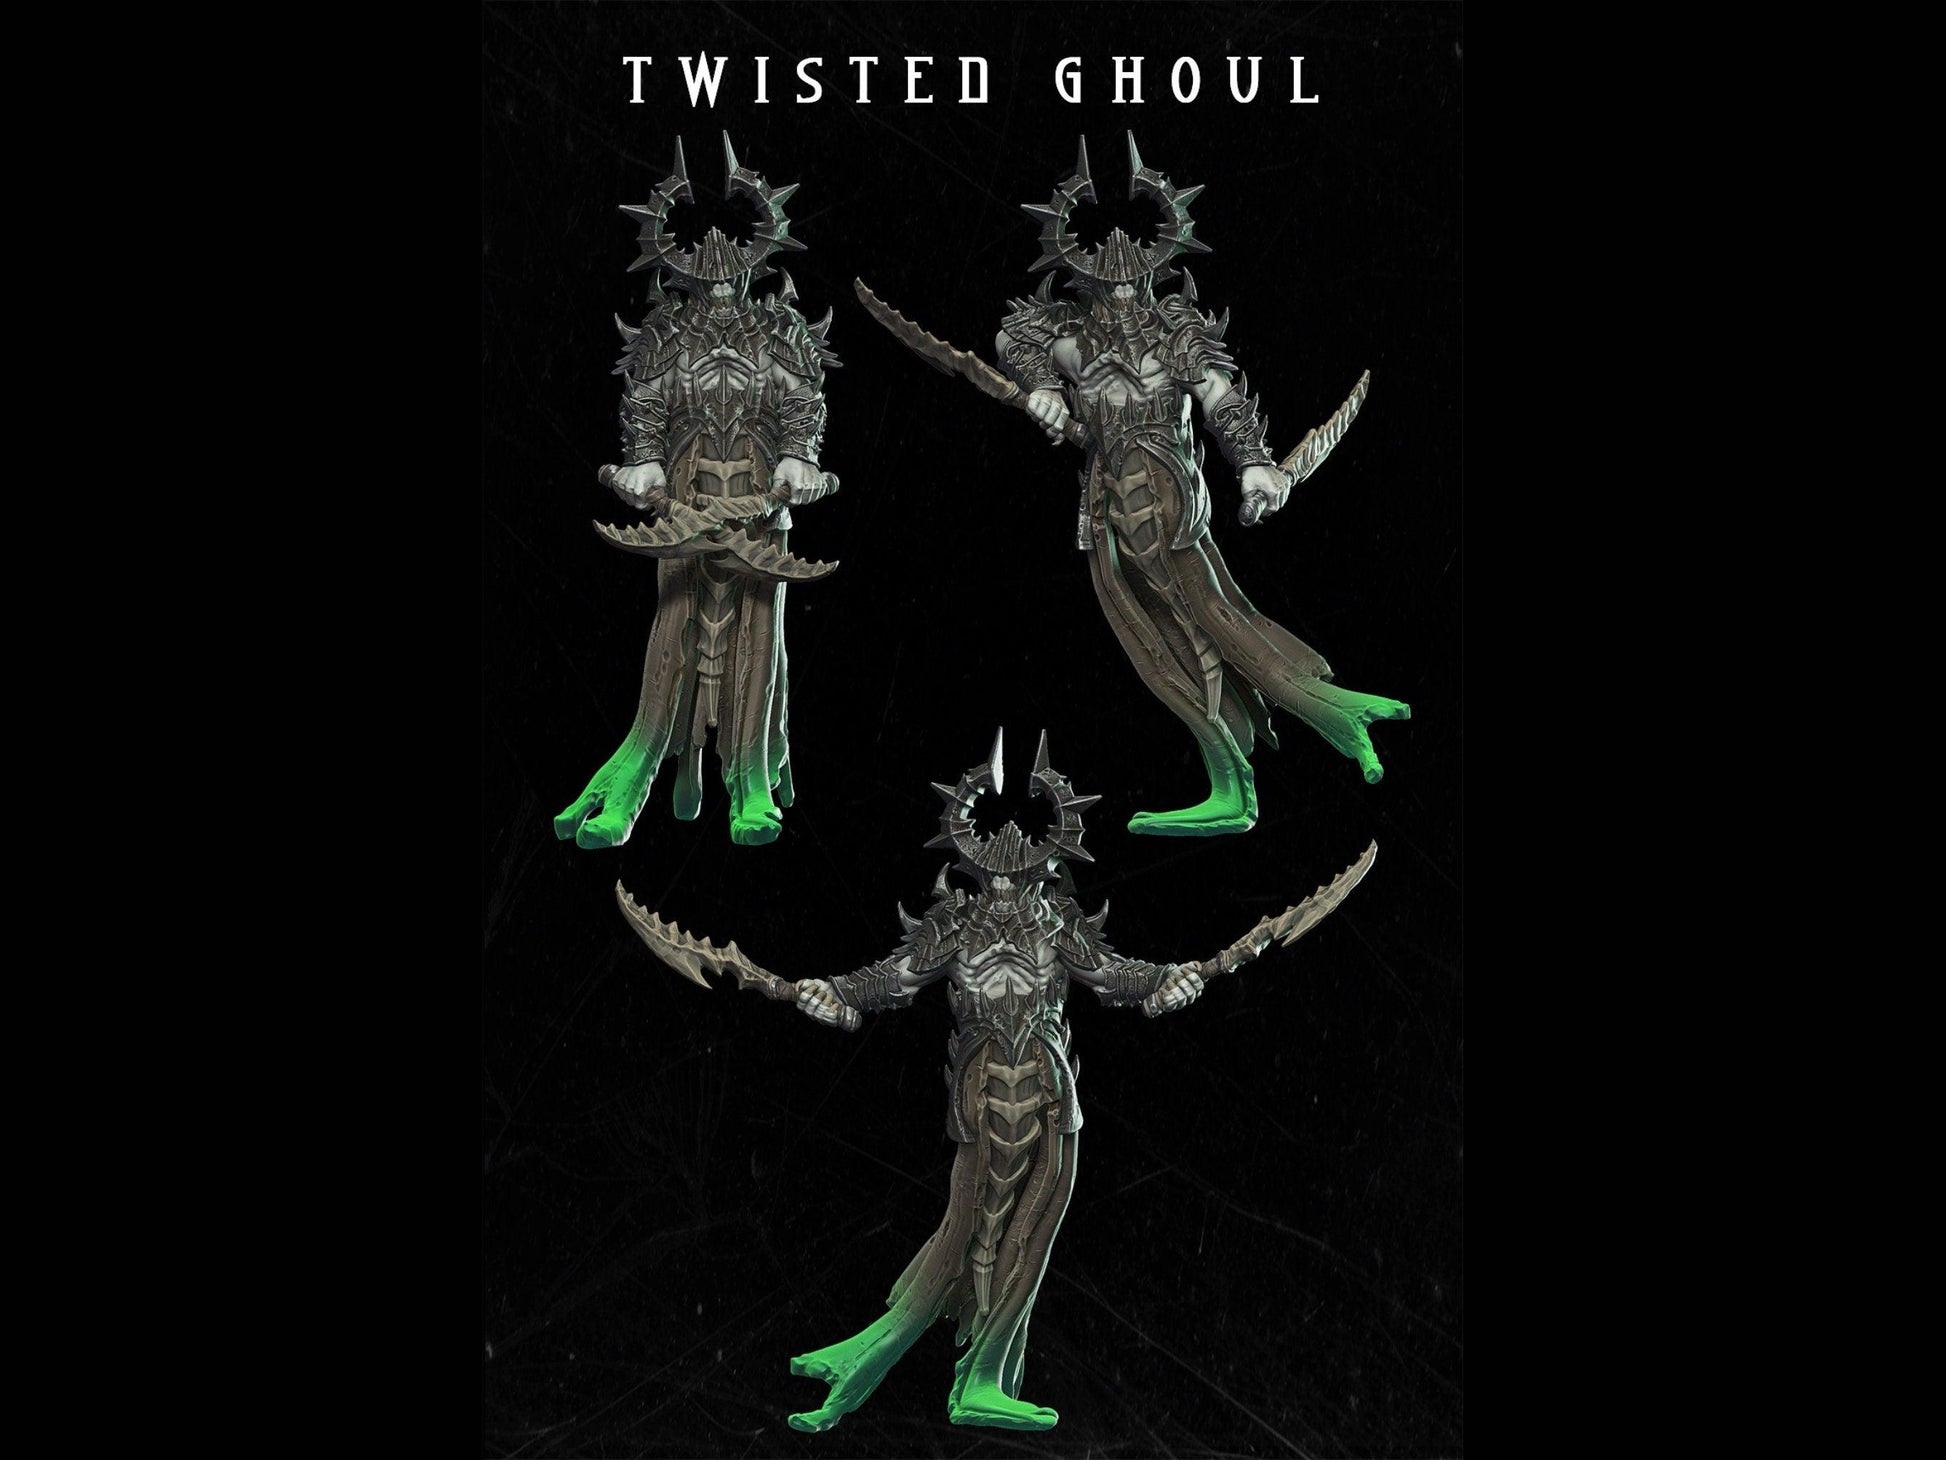 Twisted Ghoul Miniature ghoul miniature - 28mm scale Tabletop gaming DnD Miniature Dungeons and Dragons, Mage miniature, dnd 5e wargaming - Plague Miniatures shop for DnD Miniatures